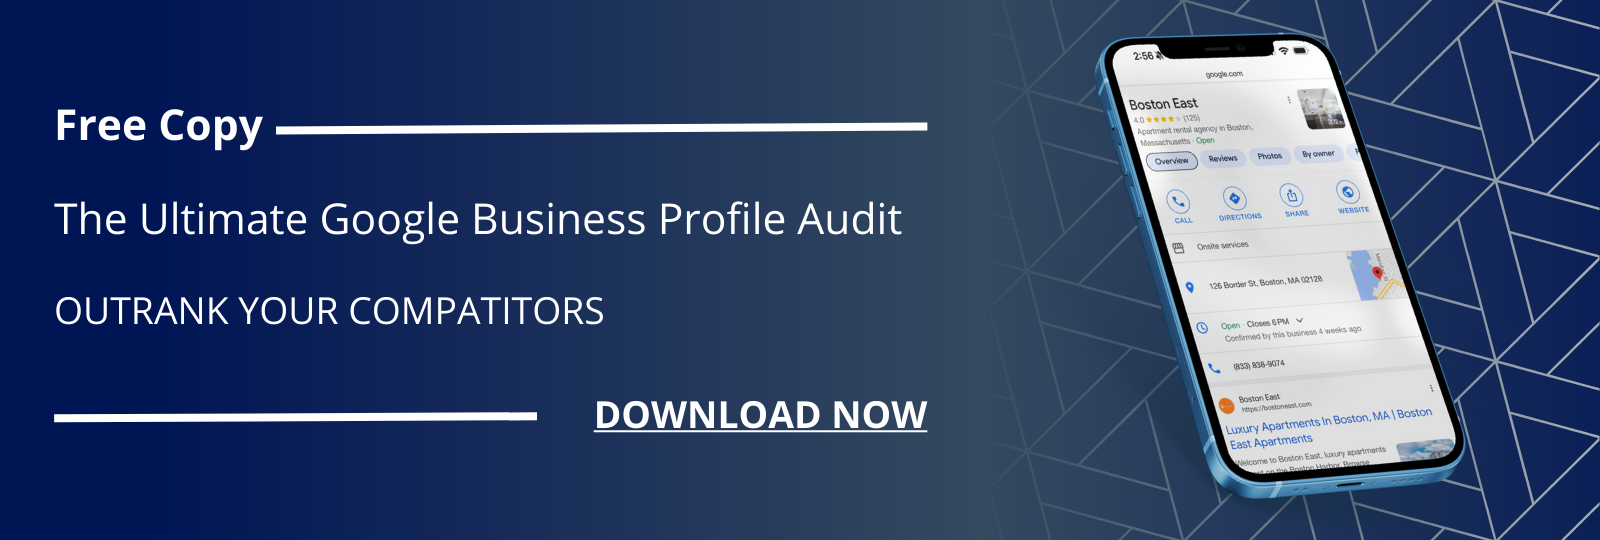 The Ultimate Google Business Profile Audit (#2)